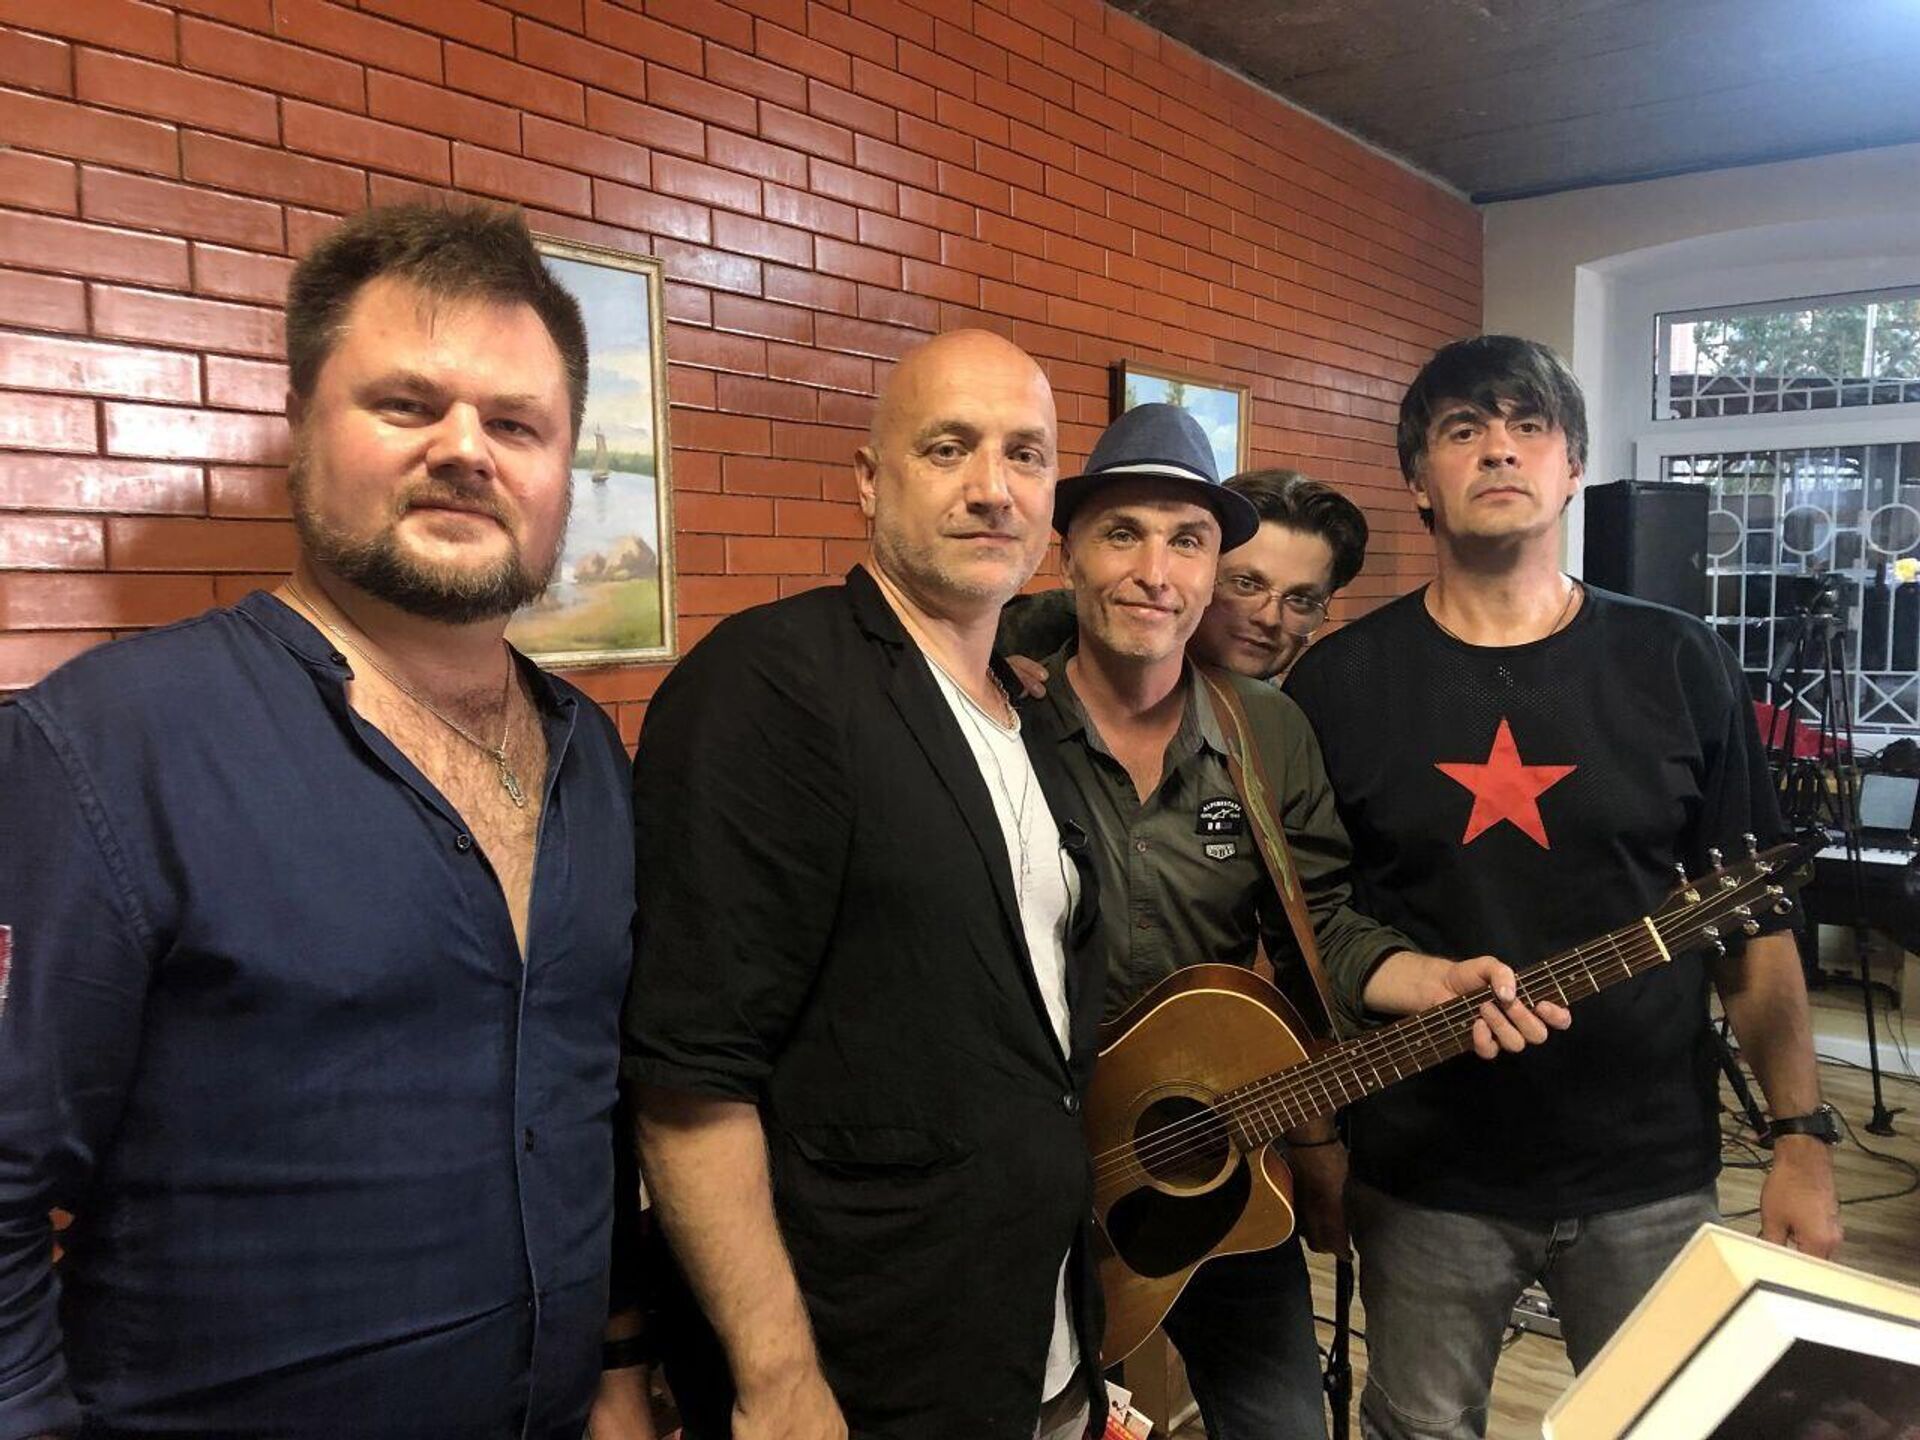 Alexei Iovchev (left), Zakhar Prilepin (second from left) and other members of the Moscow rock band Zveroboy pose for a photo. - Sputnik International, 1920, 06.05.2023